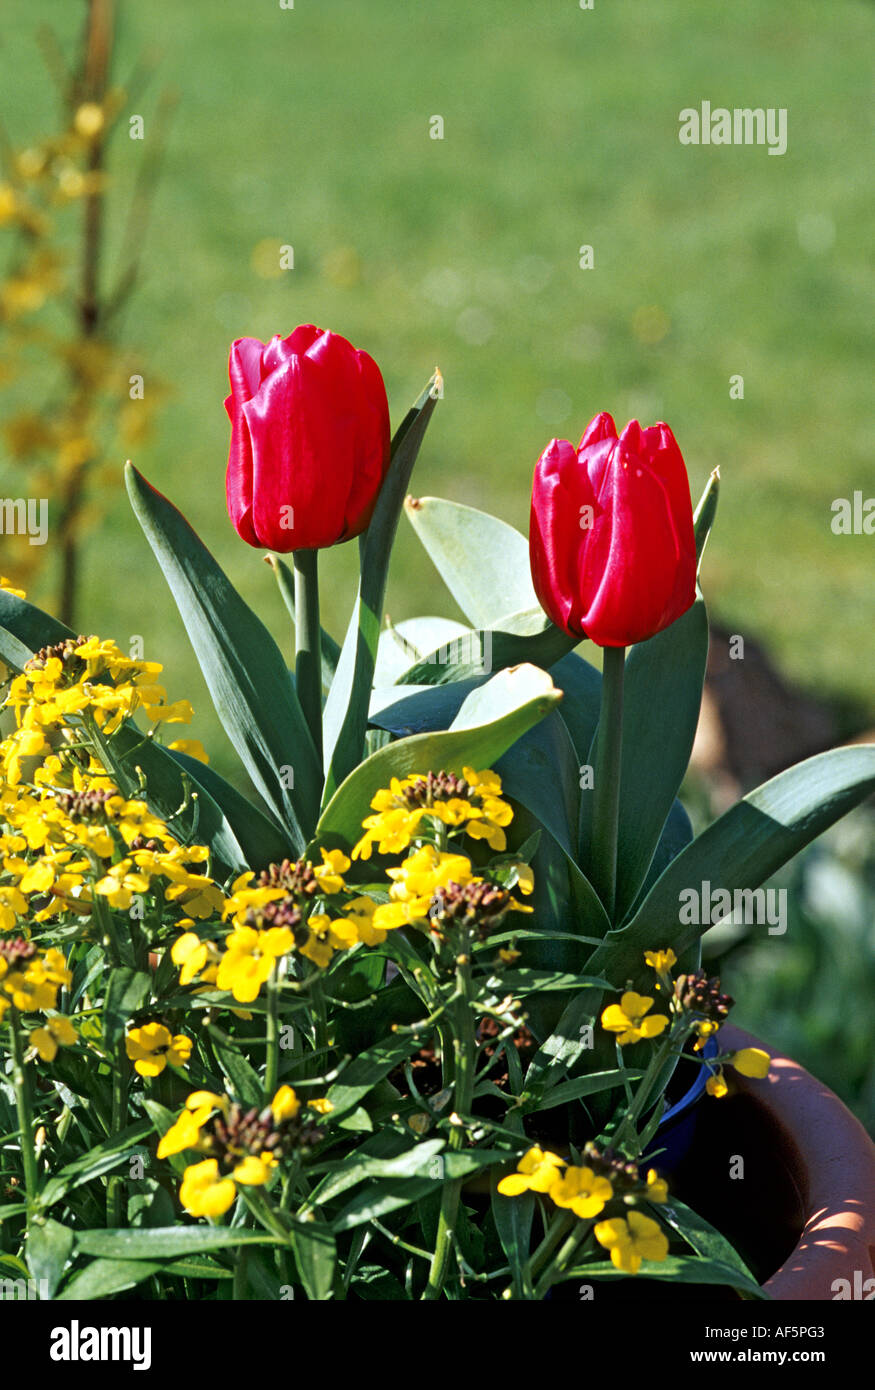 Two red tulips variety 'Flair' and yellow erysimum flowers in a spring garden Stock Photo